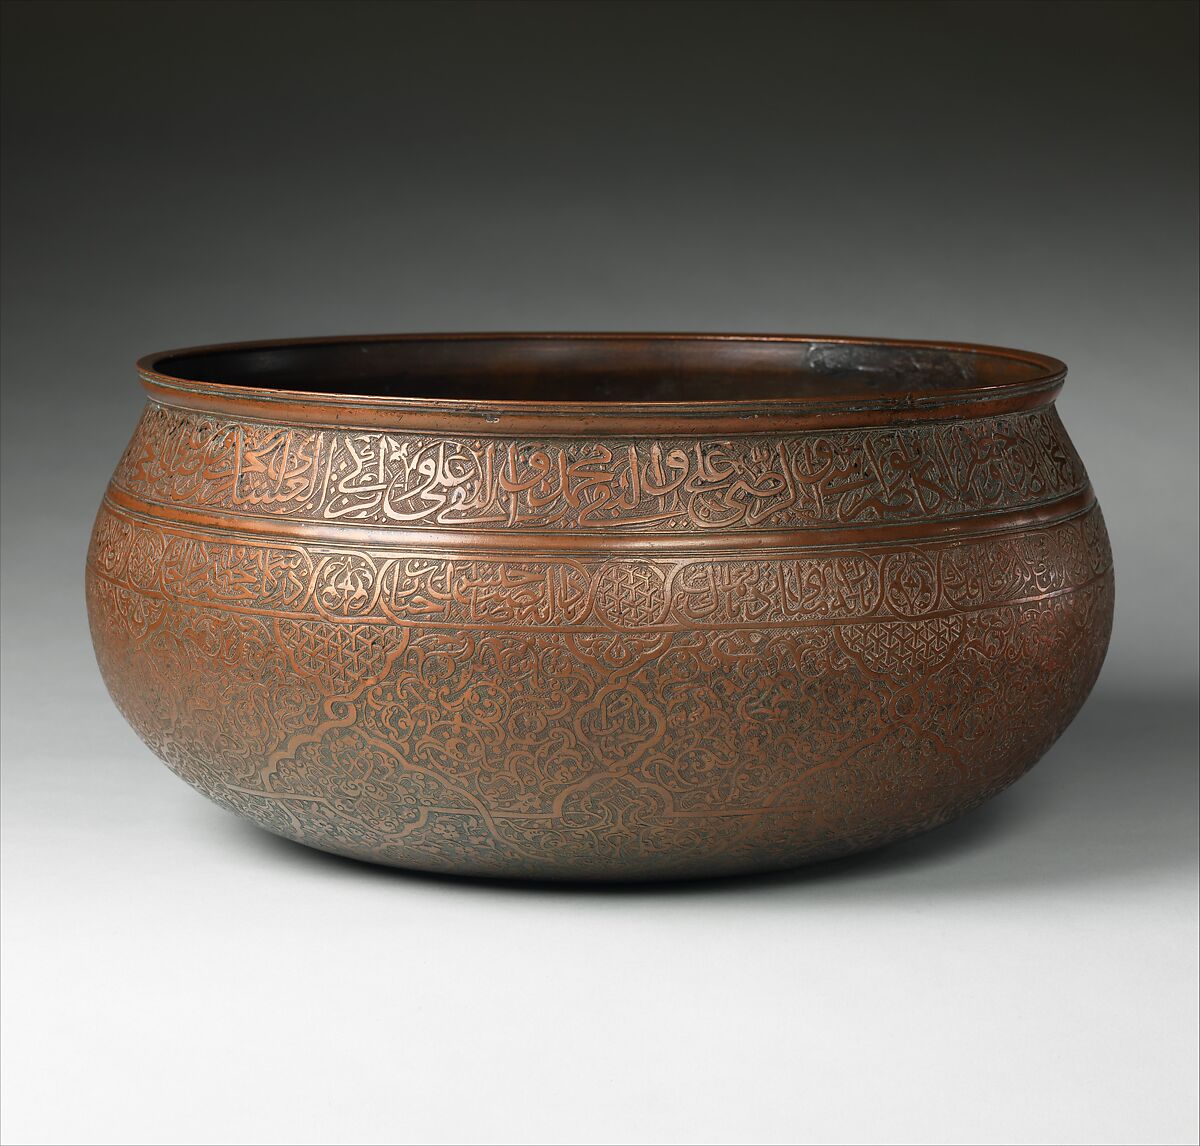 Inscribed Bowl, Al-Imami Sayyid Naqqash al-Husaini (active Iran, first half 16th century), Copper; tinned, engraved, and inlaid with black compound 